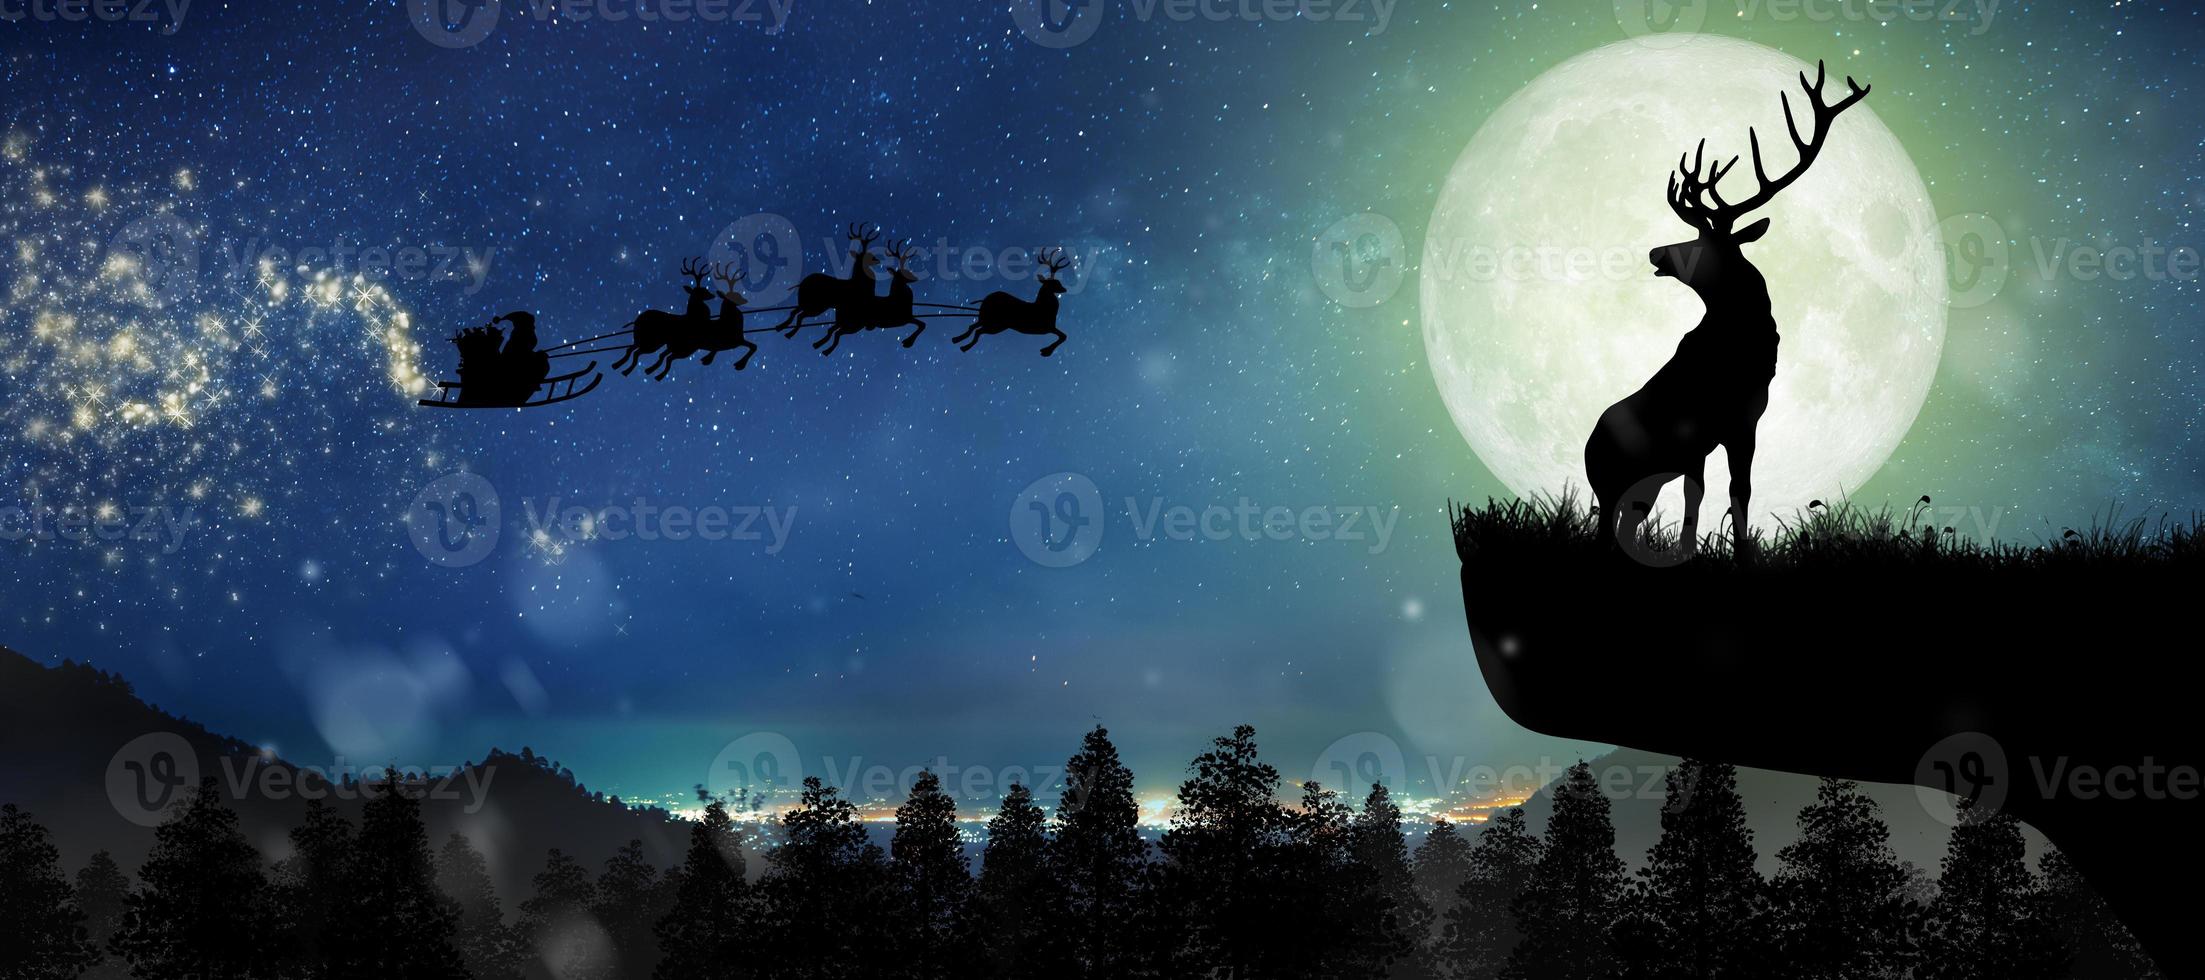 Silhouette of reindeer standing on the cliff to see Santa Claus flying on their reindeer over the full moon at night Christmas. photo